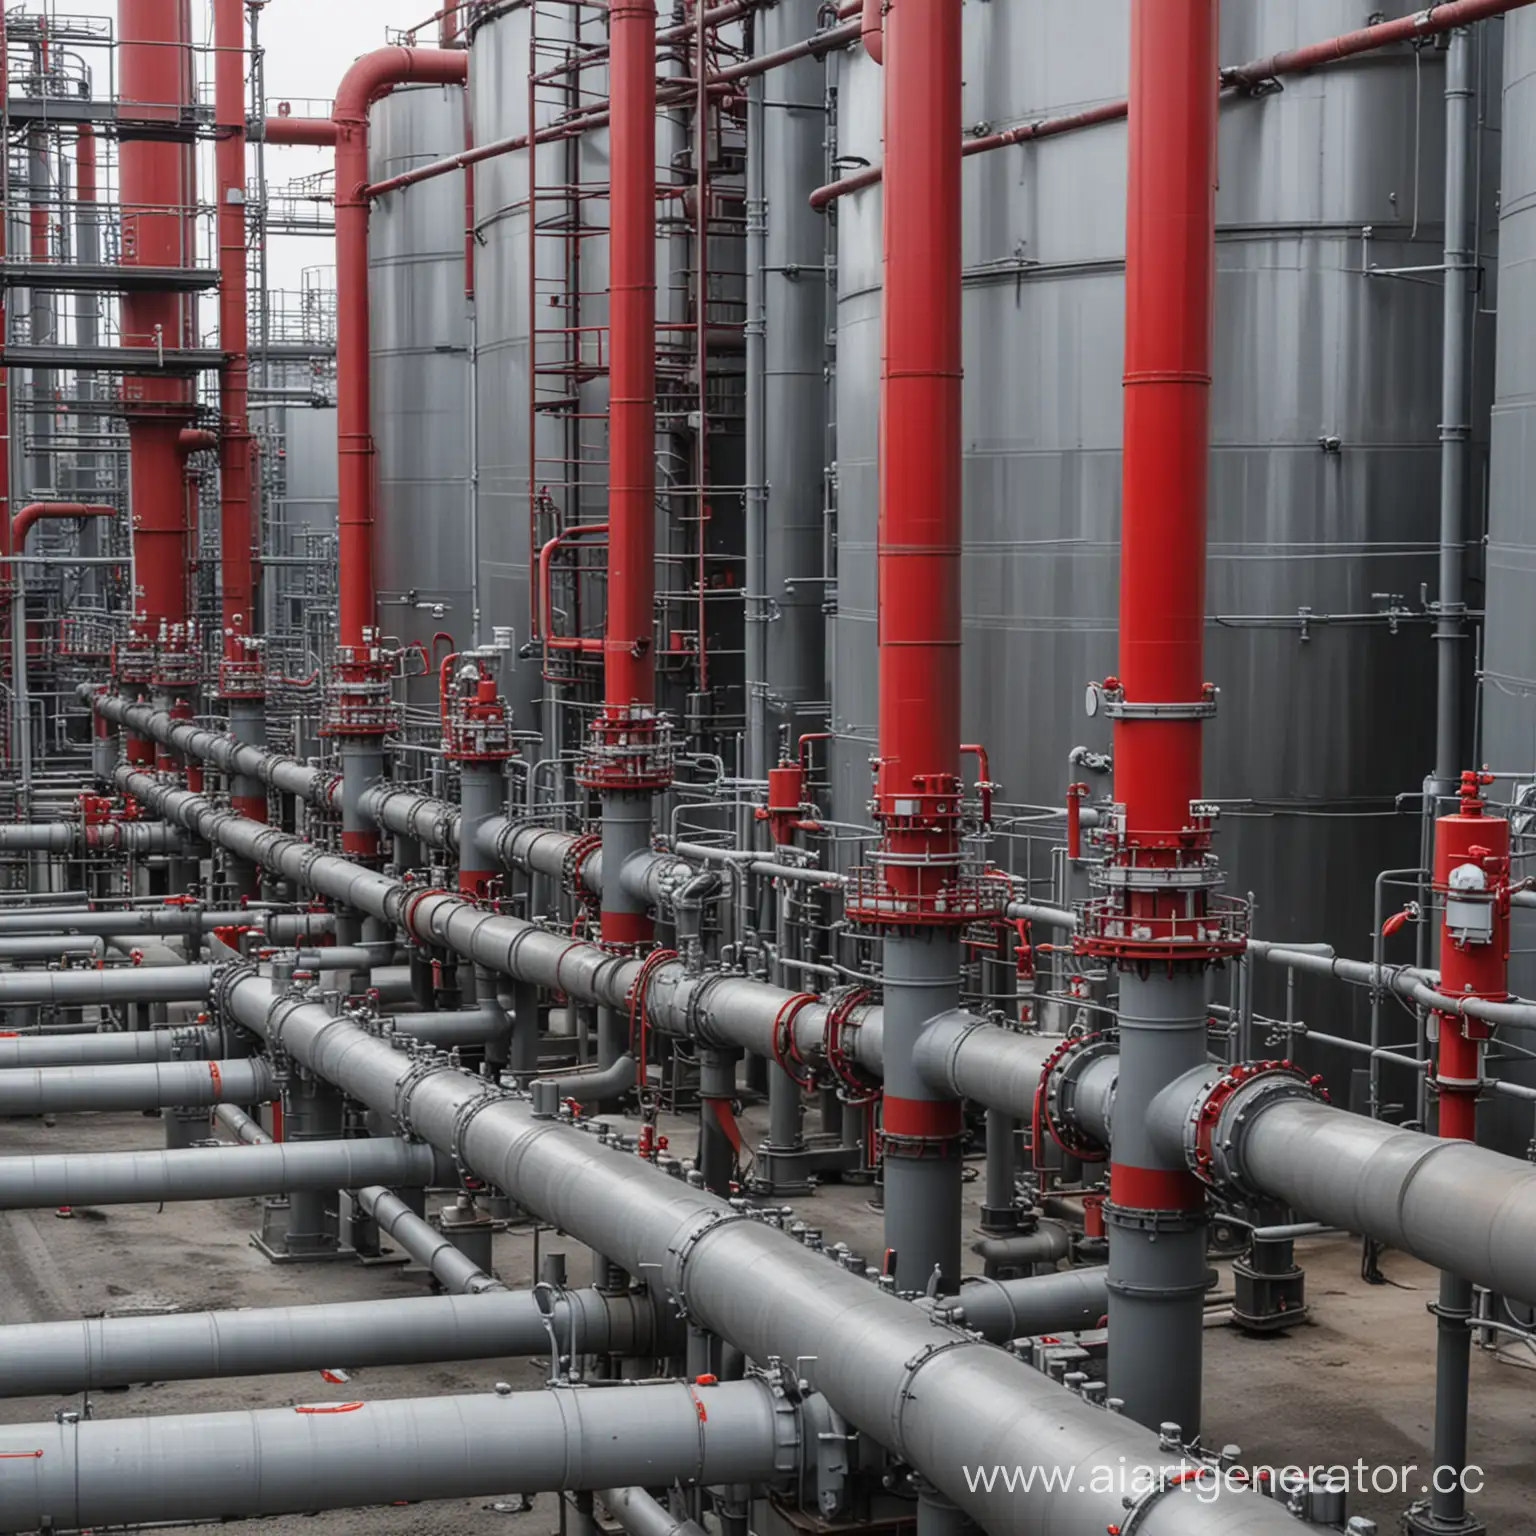 Industrial-Oil-Refinery-with-Red-and-Gray-Ball-Valves